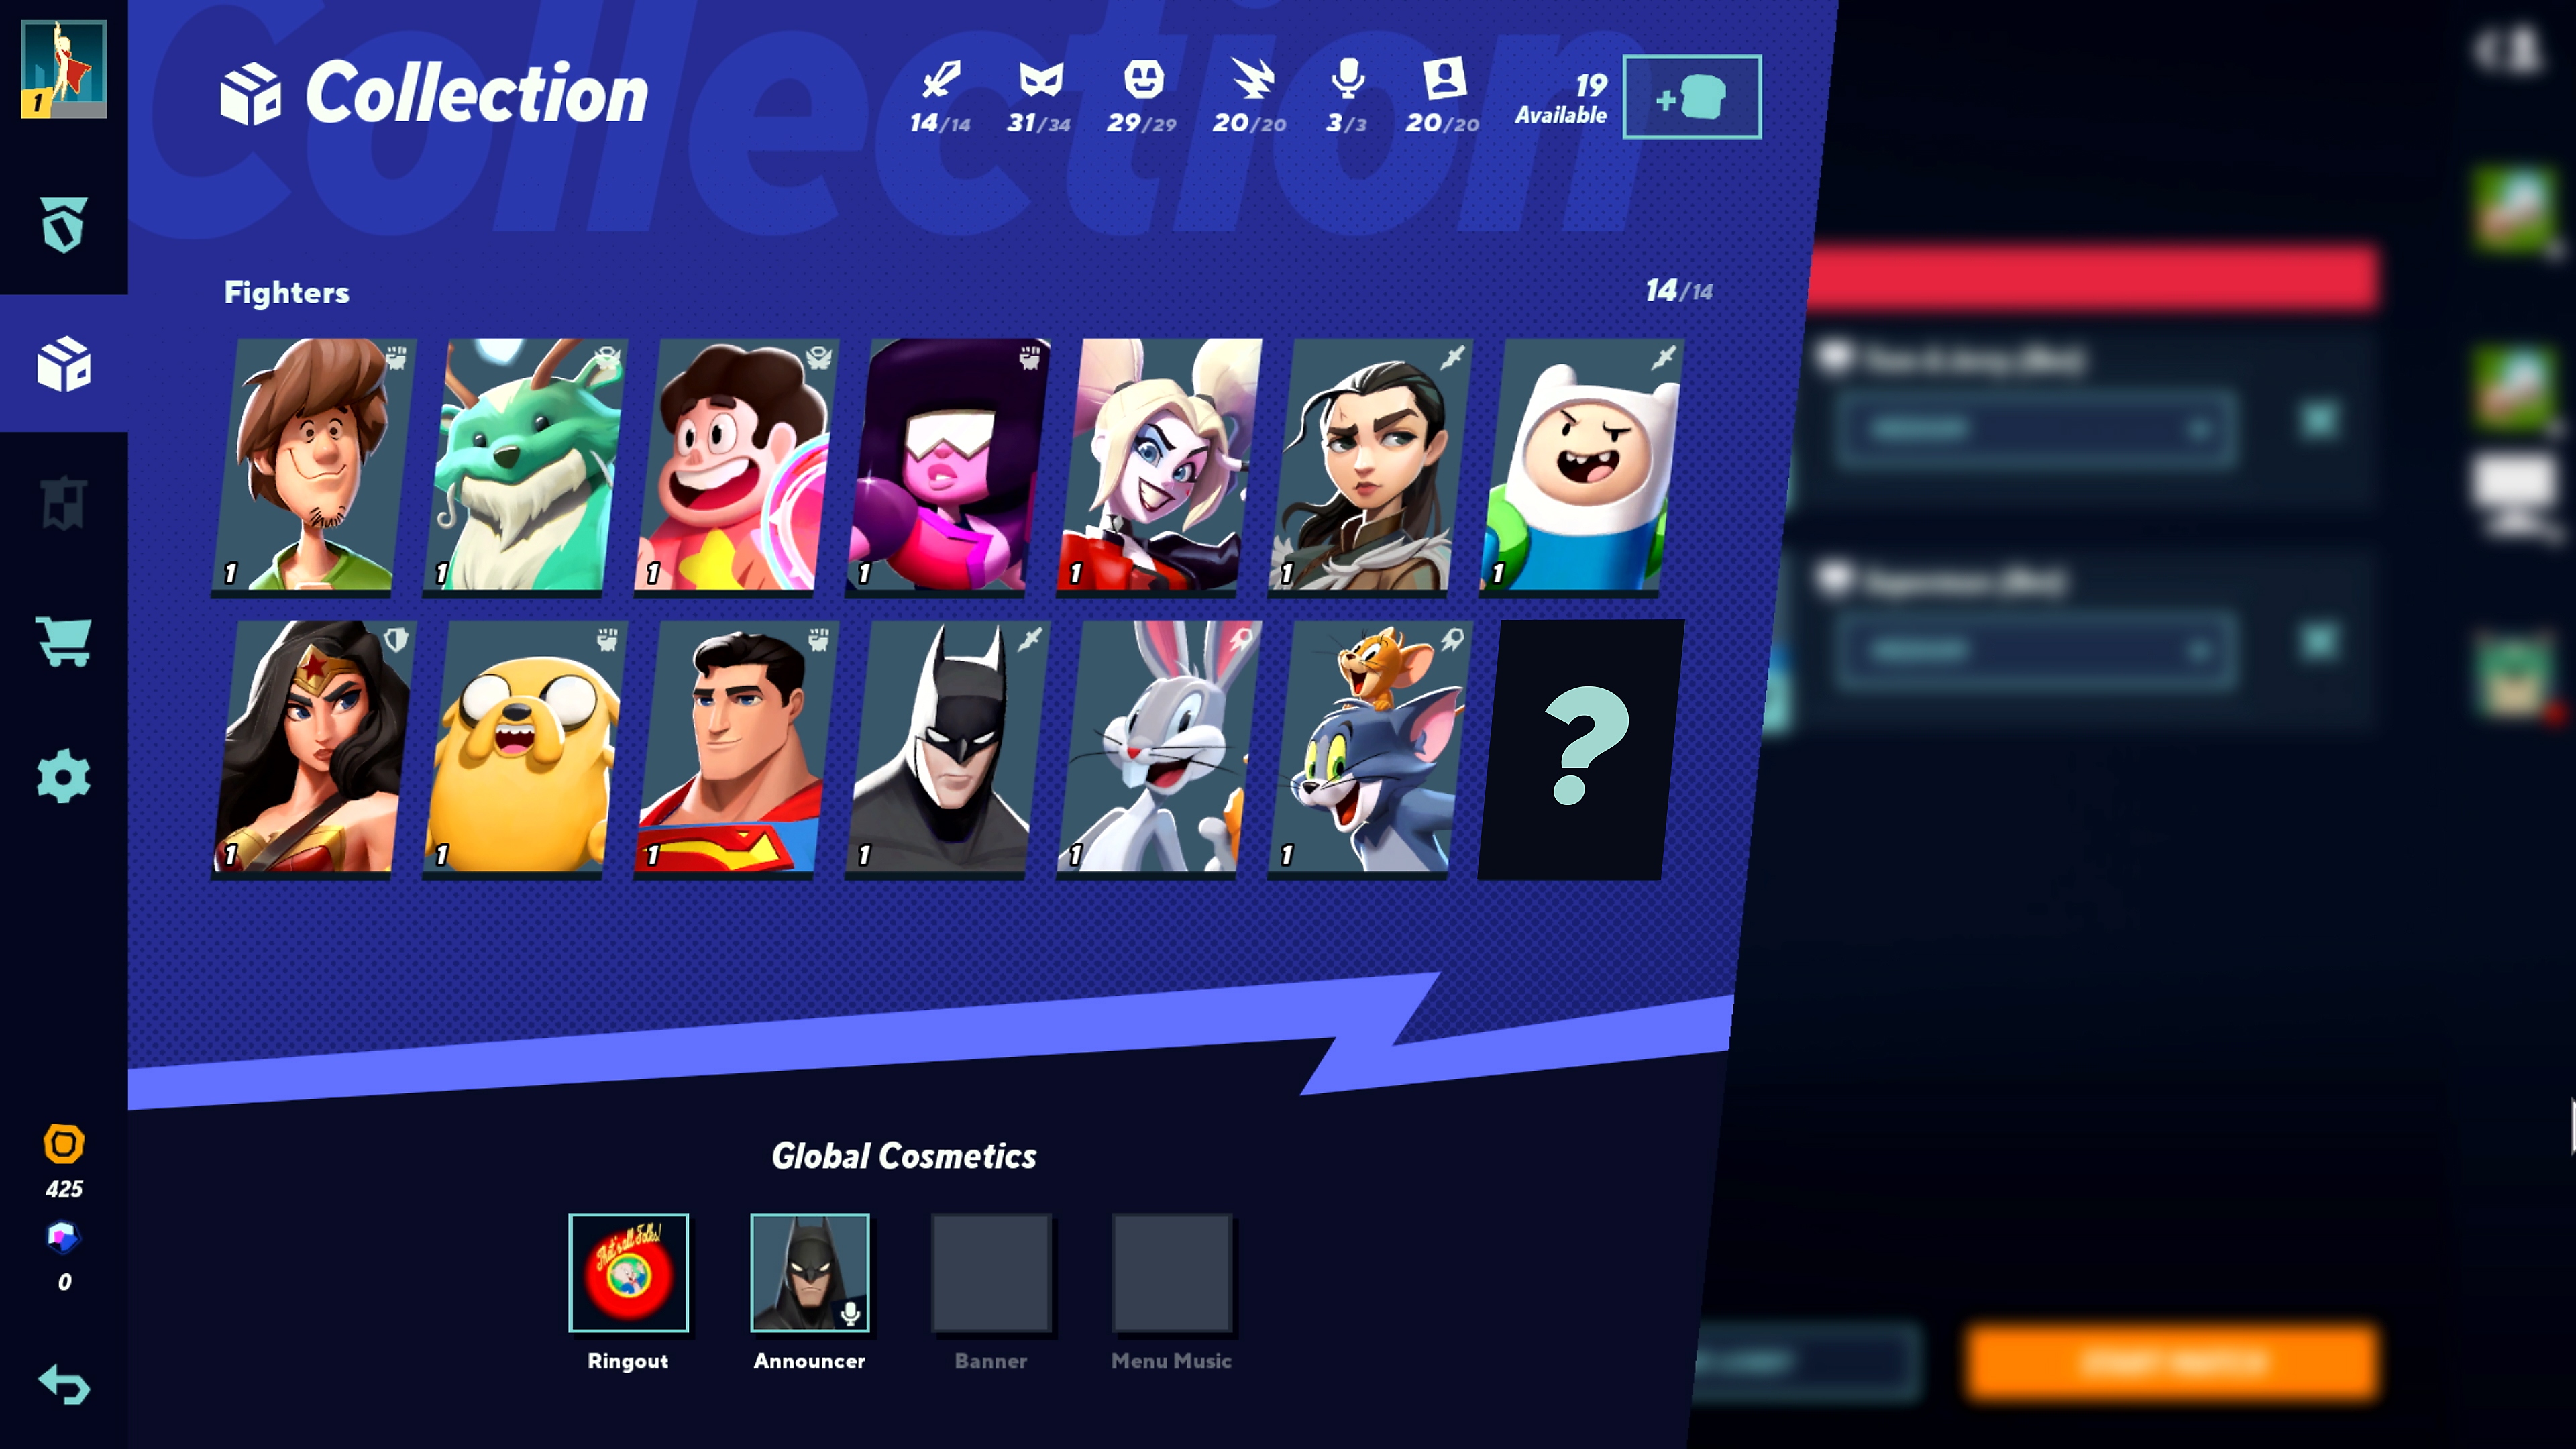 MultiVersus screenshot showing the character collection